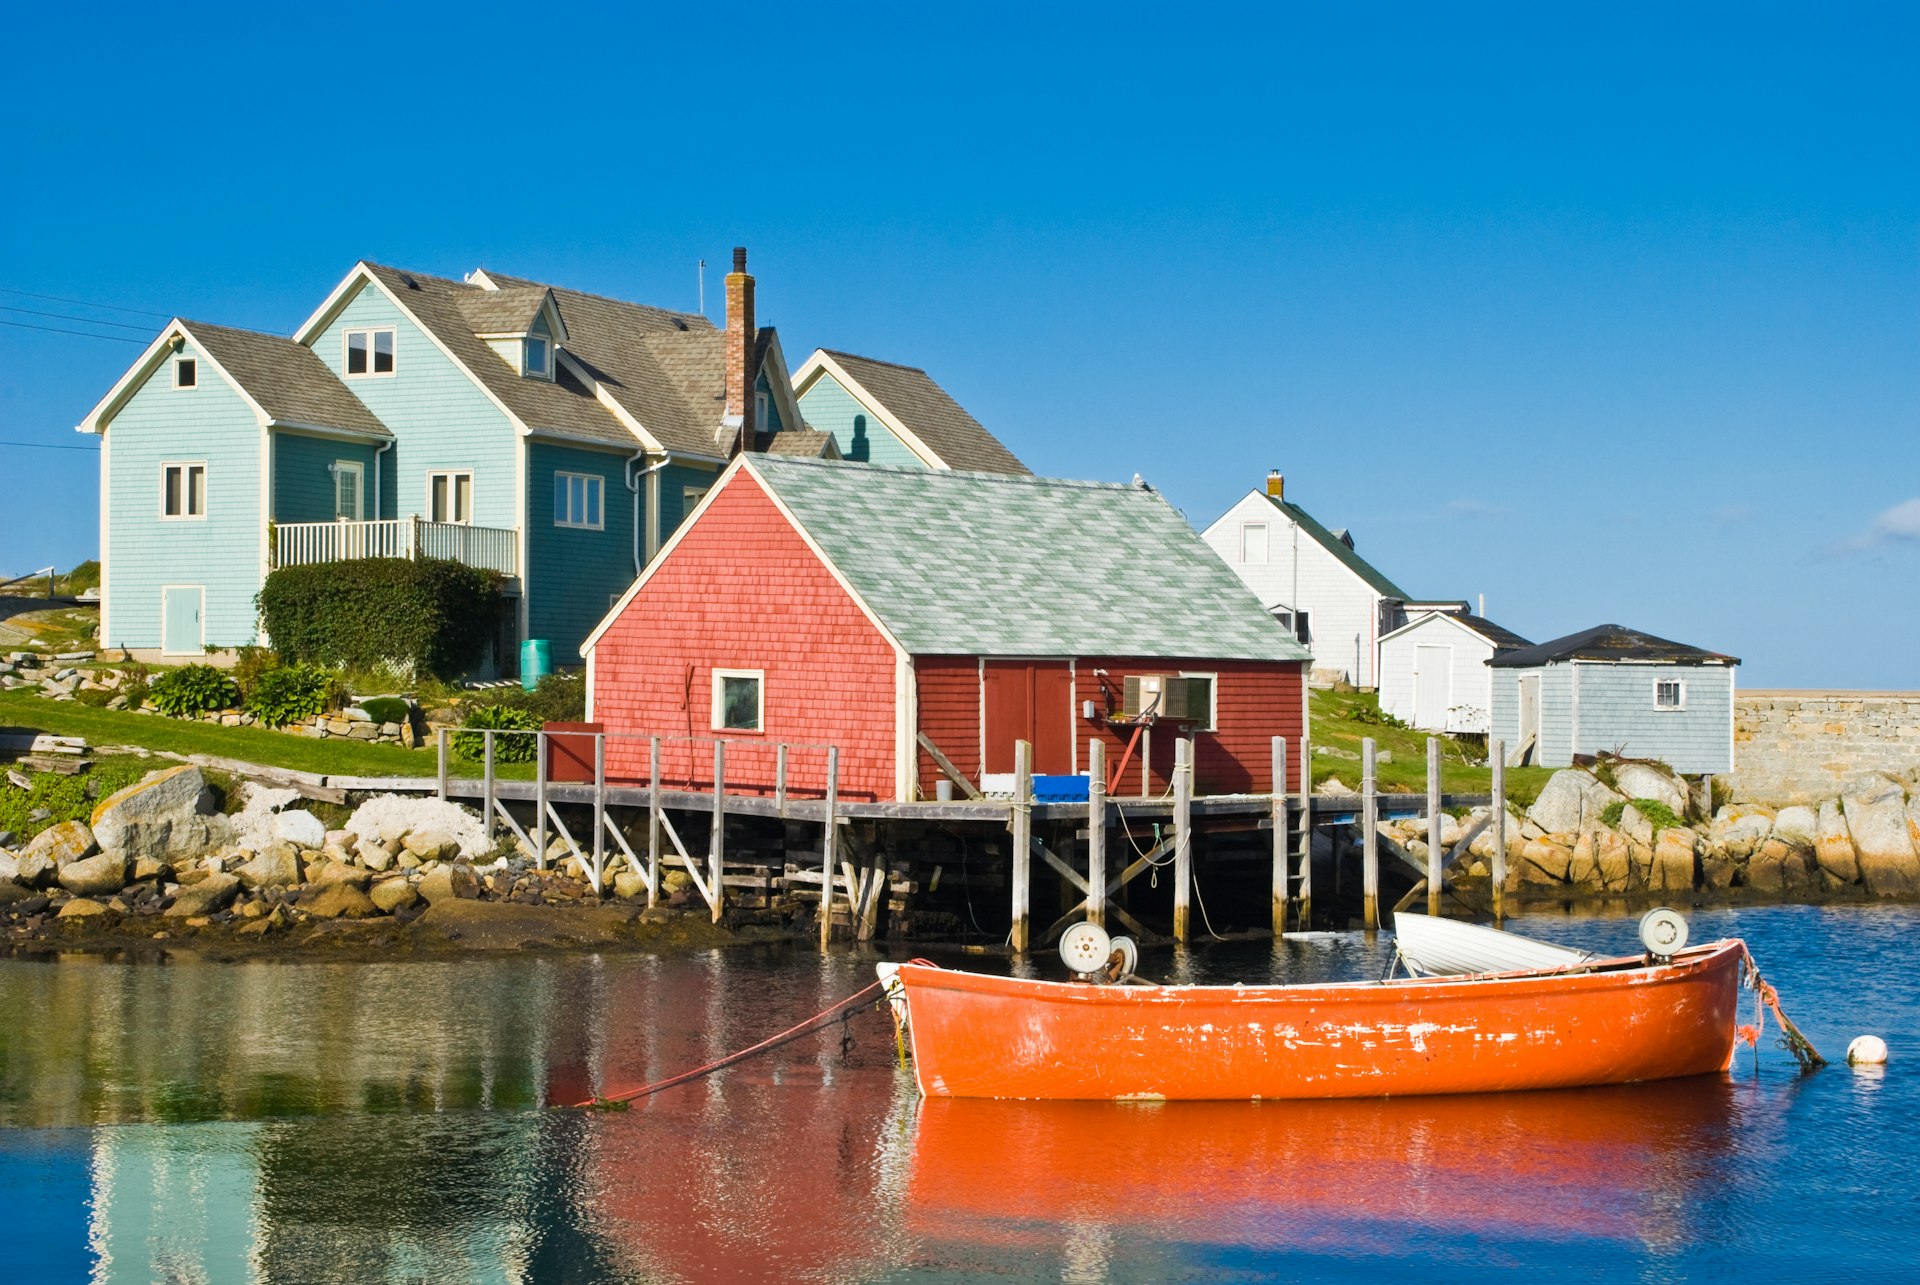 Fisherman's house and boats in bay, Peggy's Cove, Canada